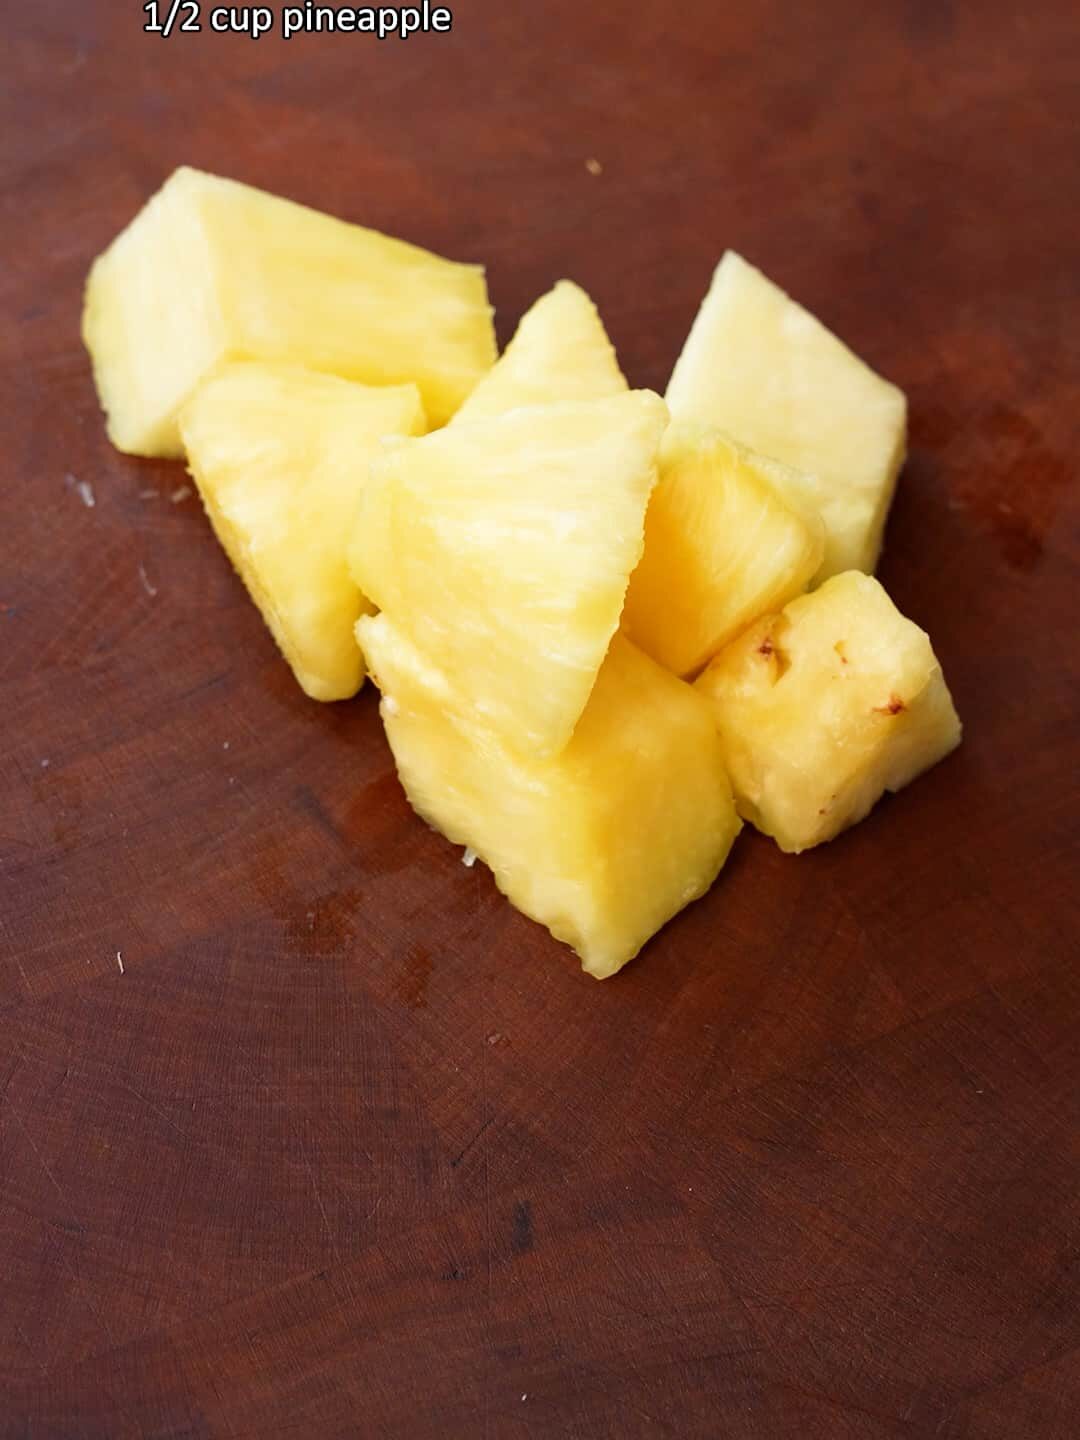 Cut pieces of pineapple on a cutting board.